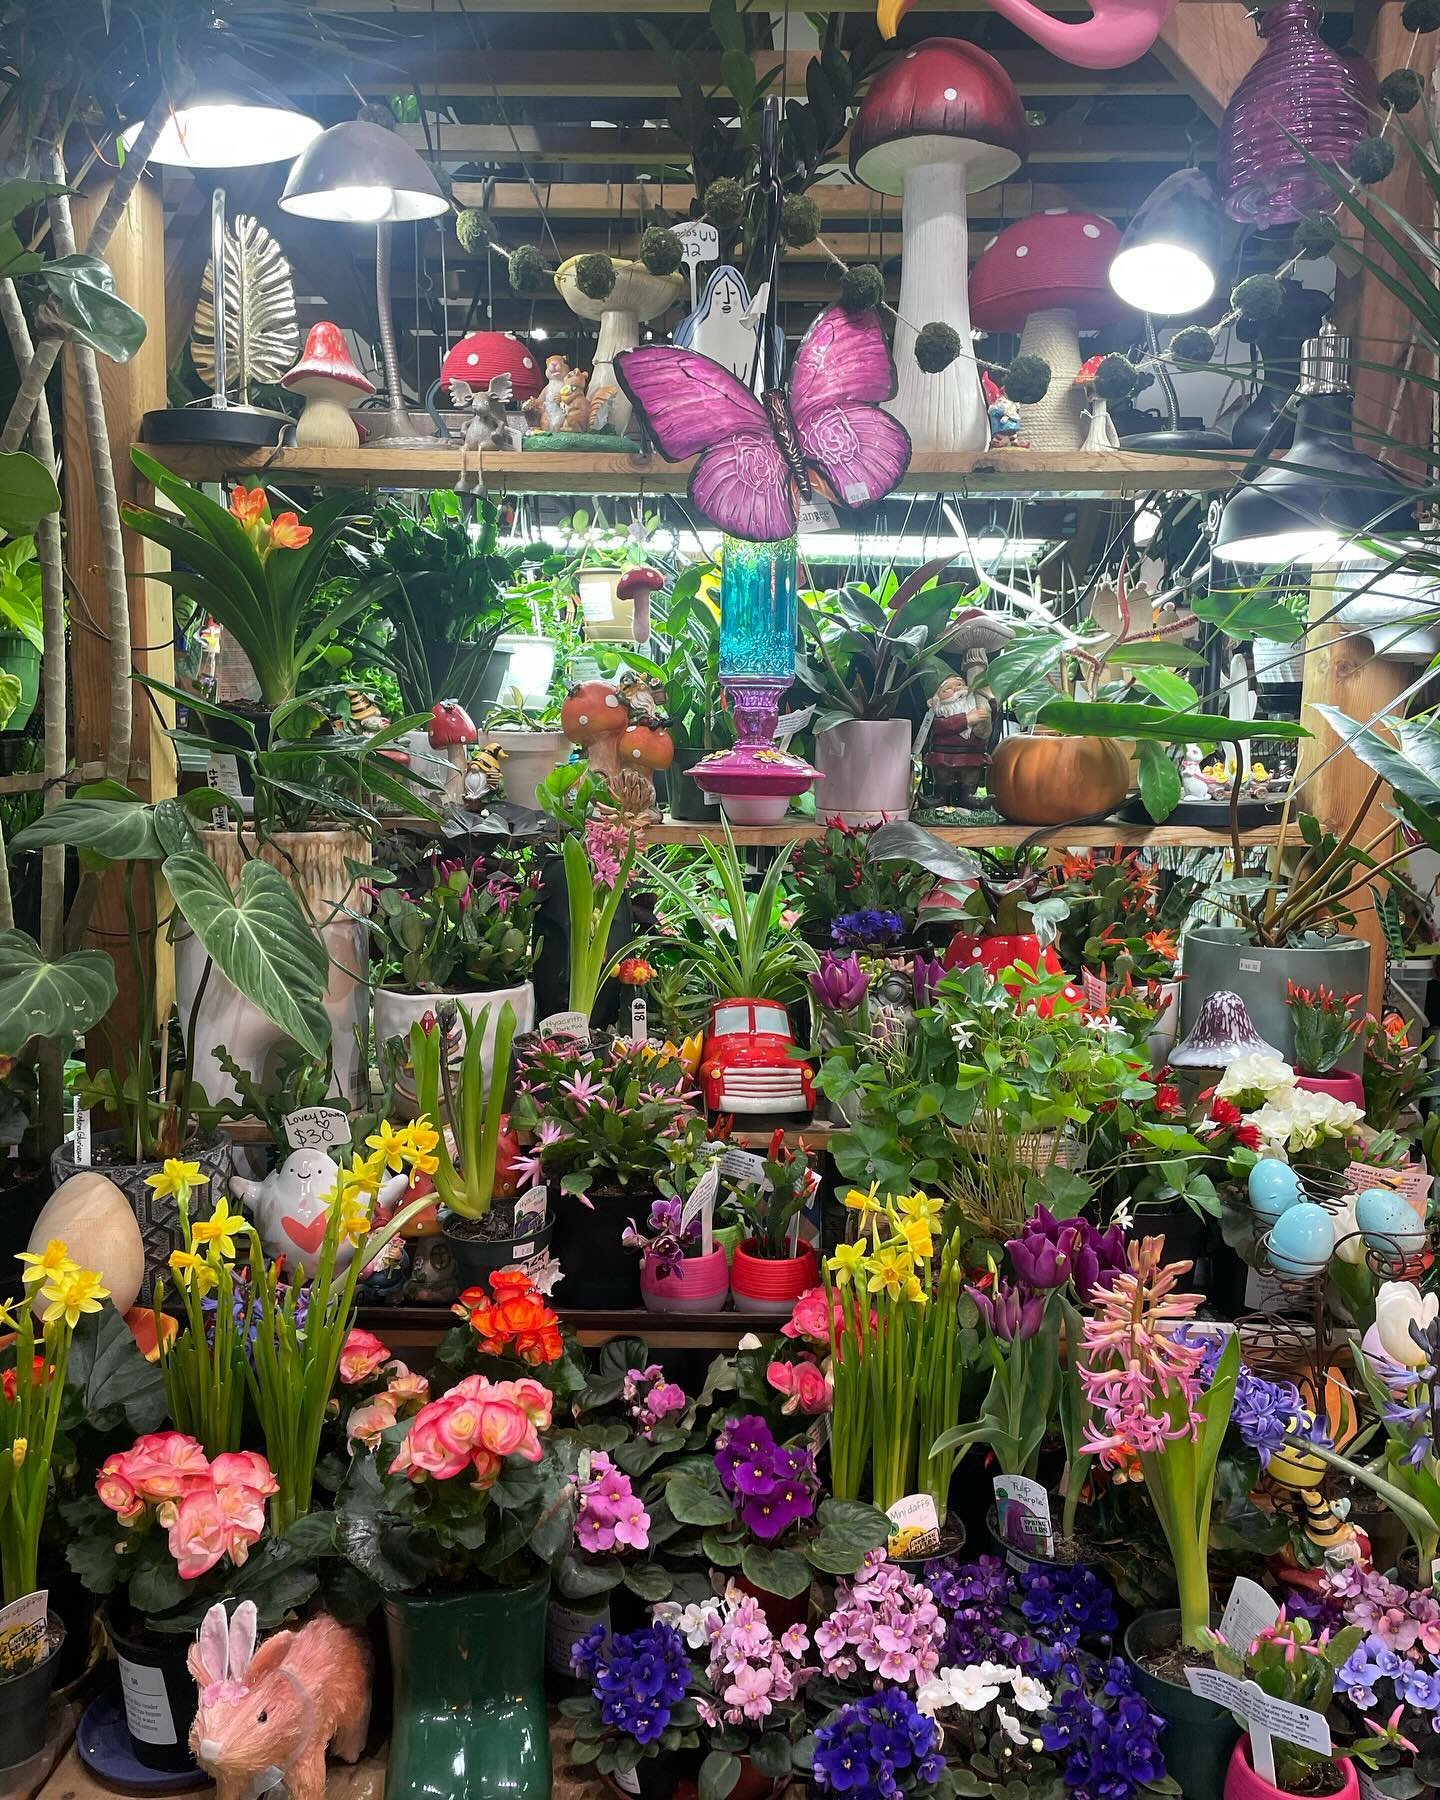 It may feel like second winter outside, but it is spring in the store! #flowersmakemehappy #plantsmakepeoplehappy #willystreet #madisonwi #secondwinter #springflowers #miatheshopdog #orchid #begonia #africanviolet #oxalis #shopdog #springofdeceptiond